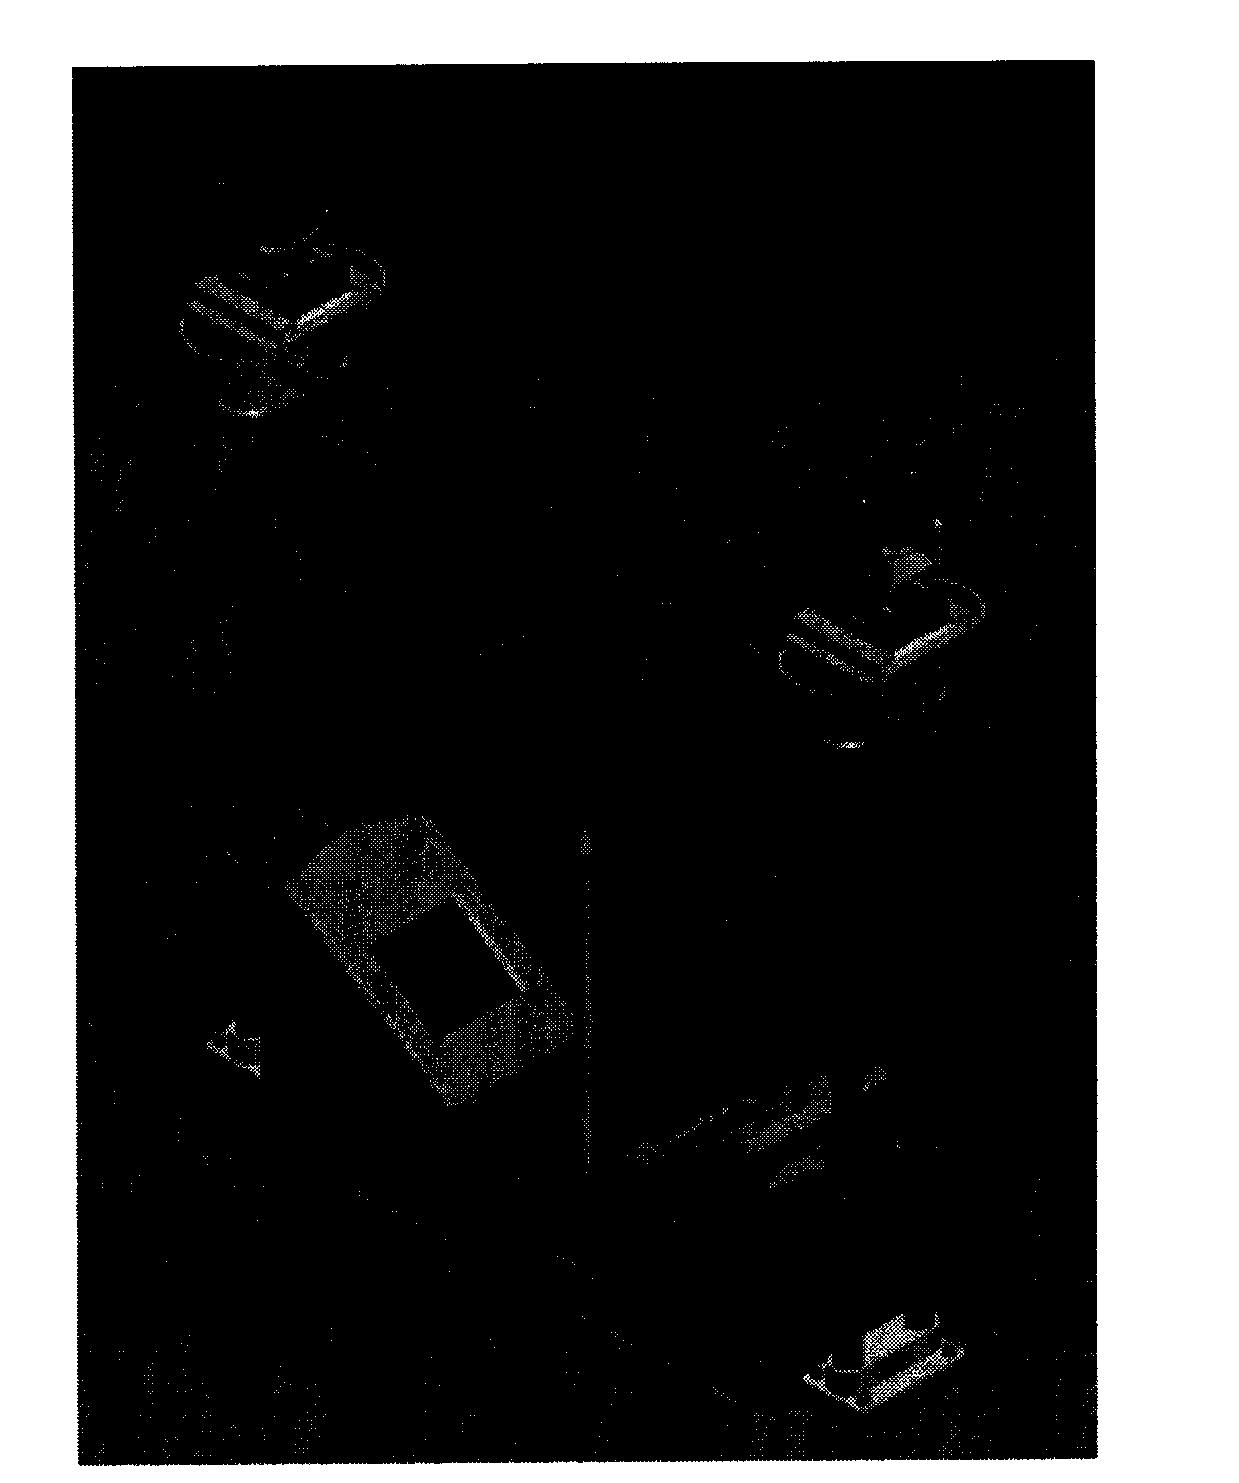 Dual-flat panel-based two-dimensional to three-dimensional medical image registering method and system